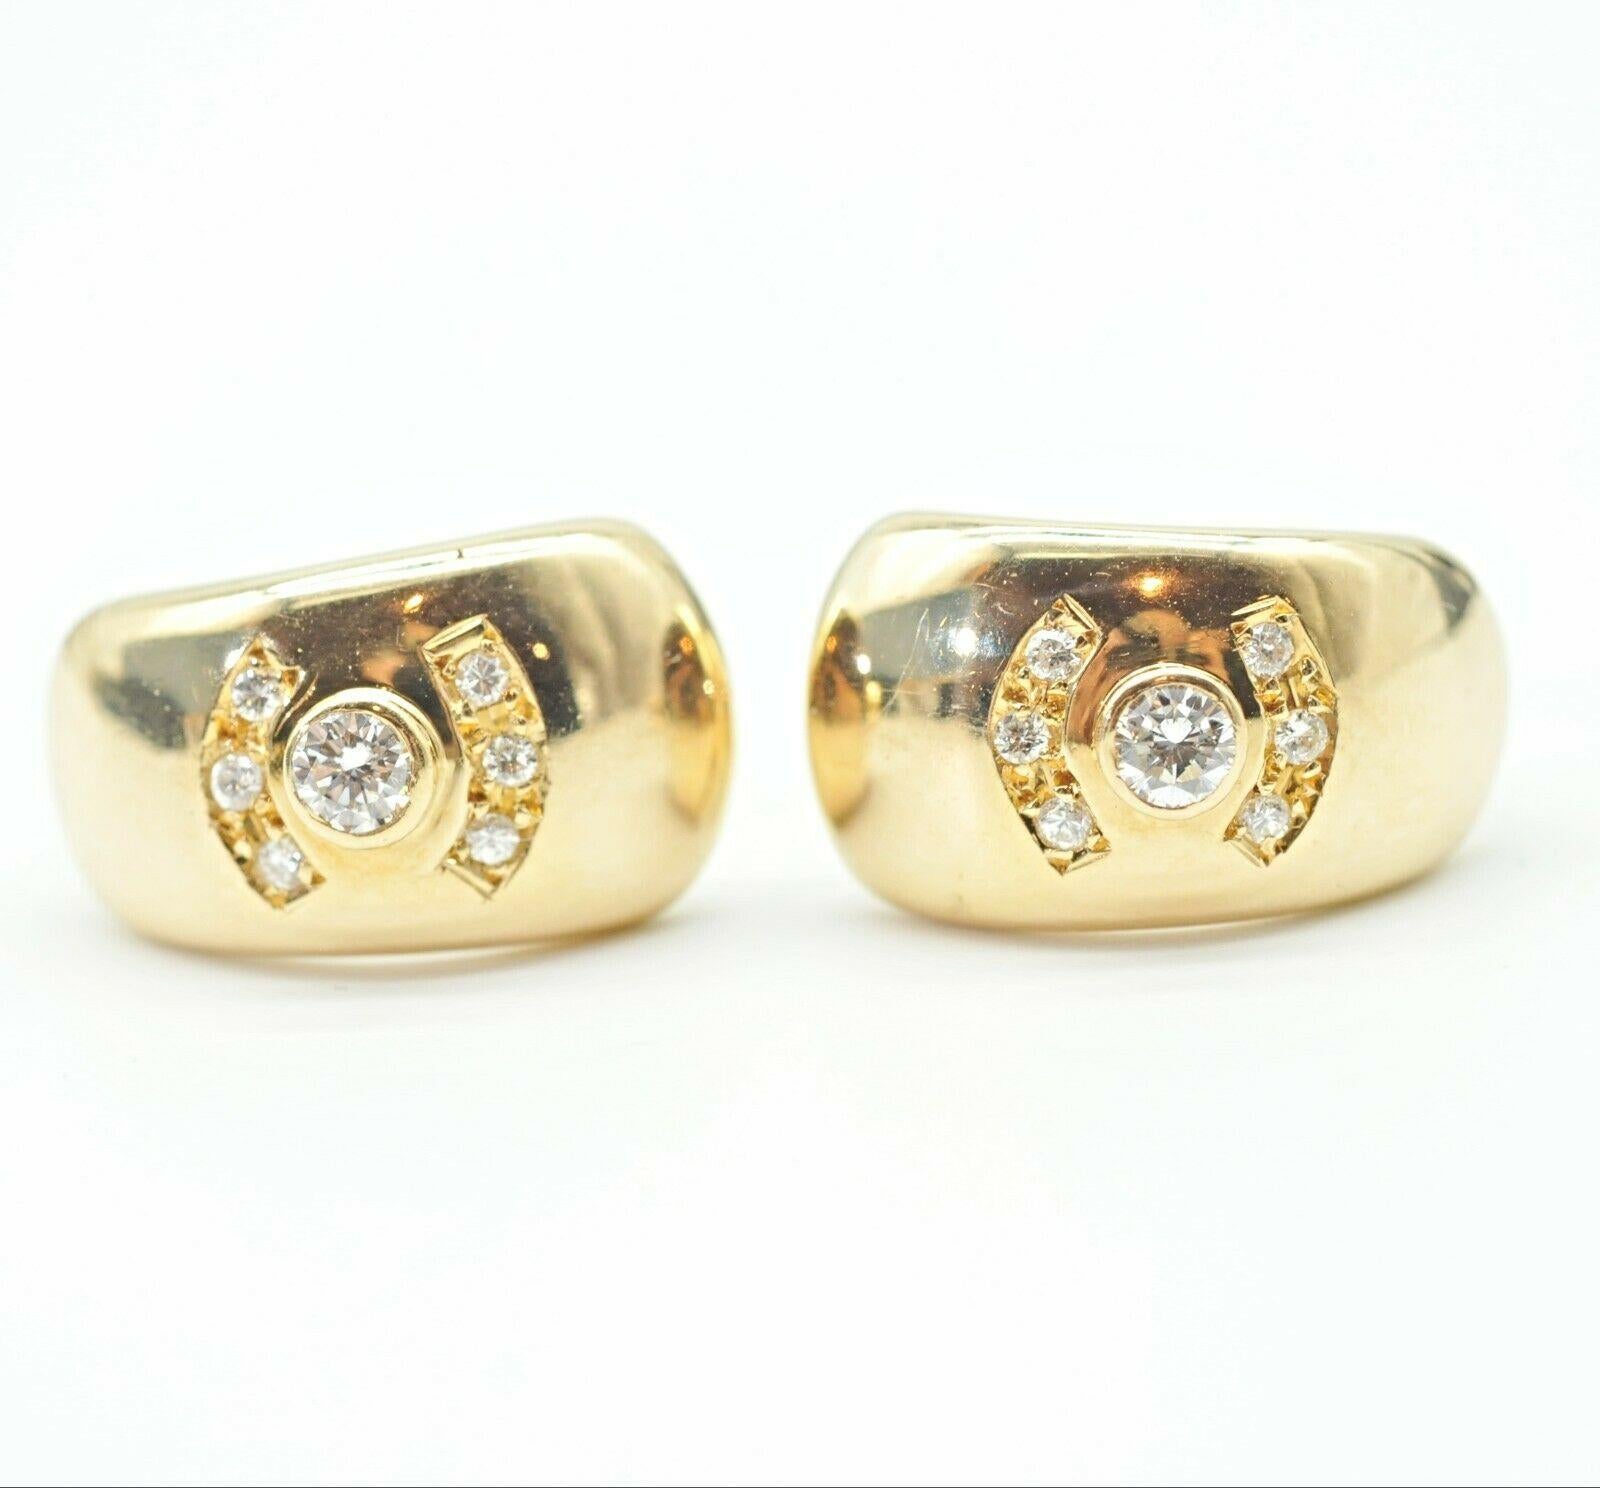  Specifications:
    main stone: ROUND DIAMOND
    DIAMOND: 14 PCS
    carat total weight: APPROXIMATELY 0.56CTW
    color: G
    clarity: VS
    brand: NONE
    metal: 18K YELLOW GOLD
    type: EARRINGS
    weight:  11.1 GrS
    size: 19.08 MM
   